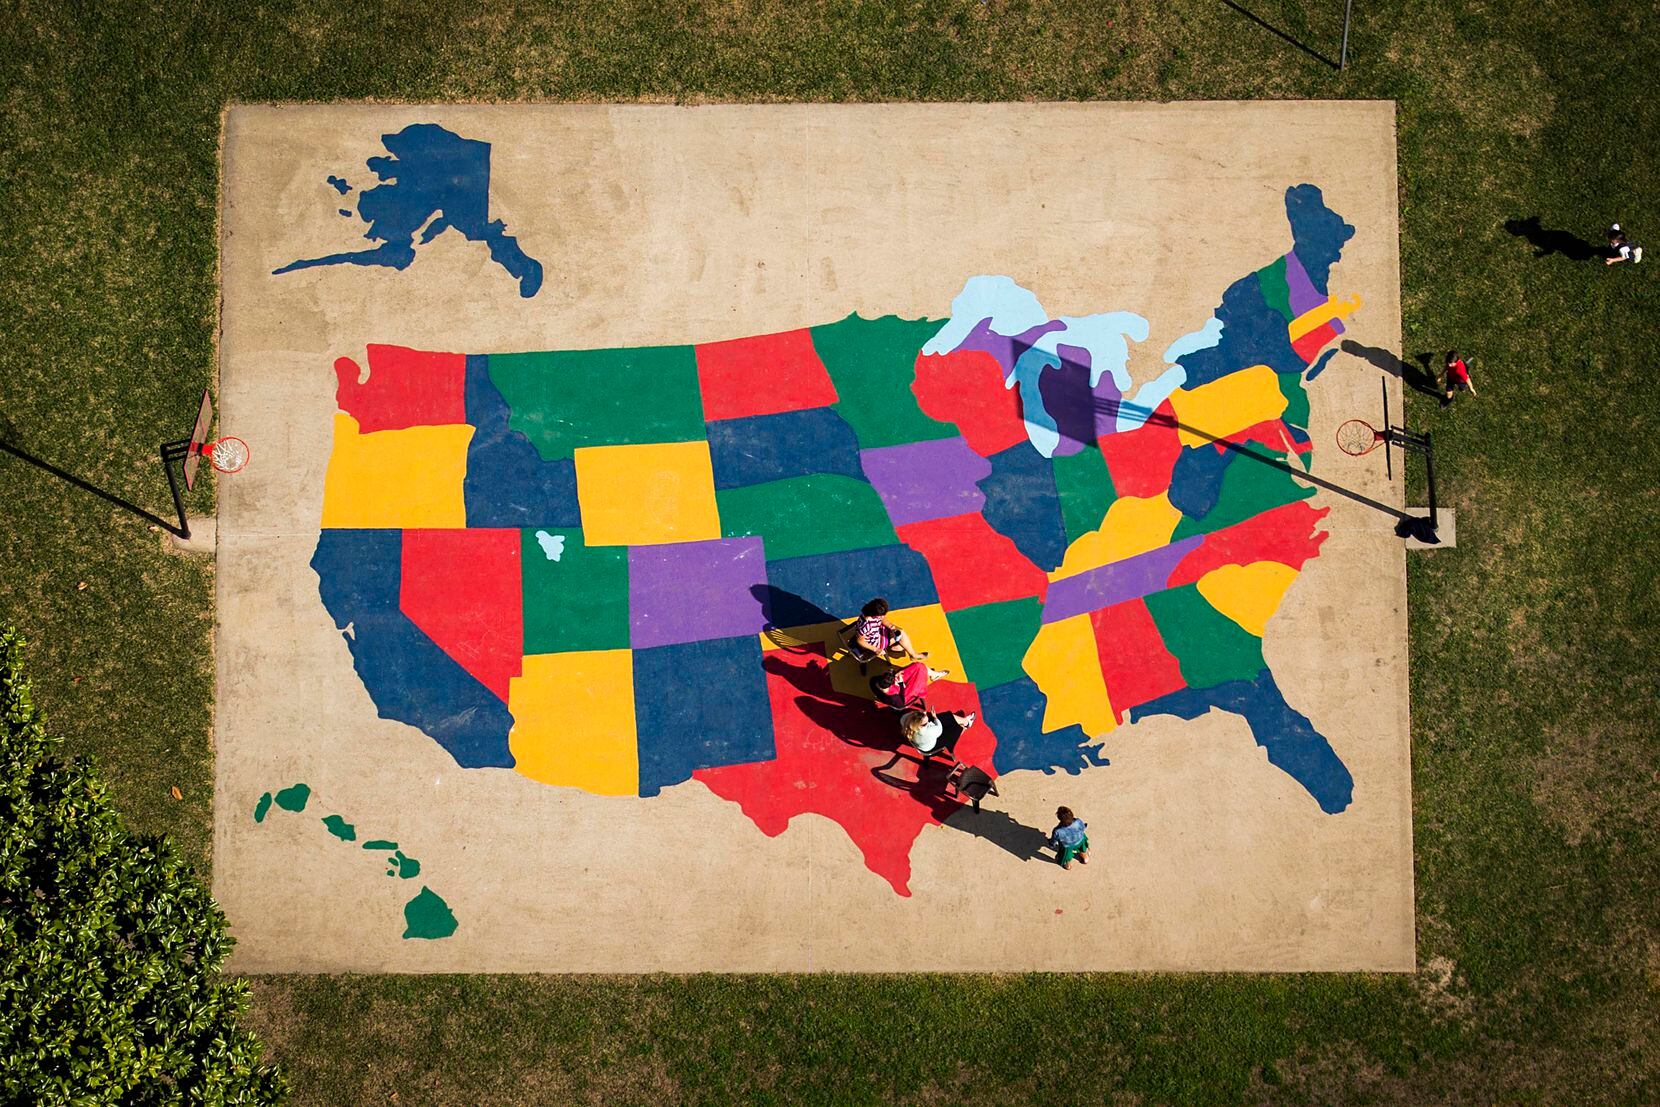 A playground map of the United Statse provides the background as adults watch children play...